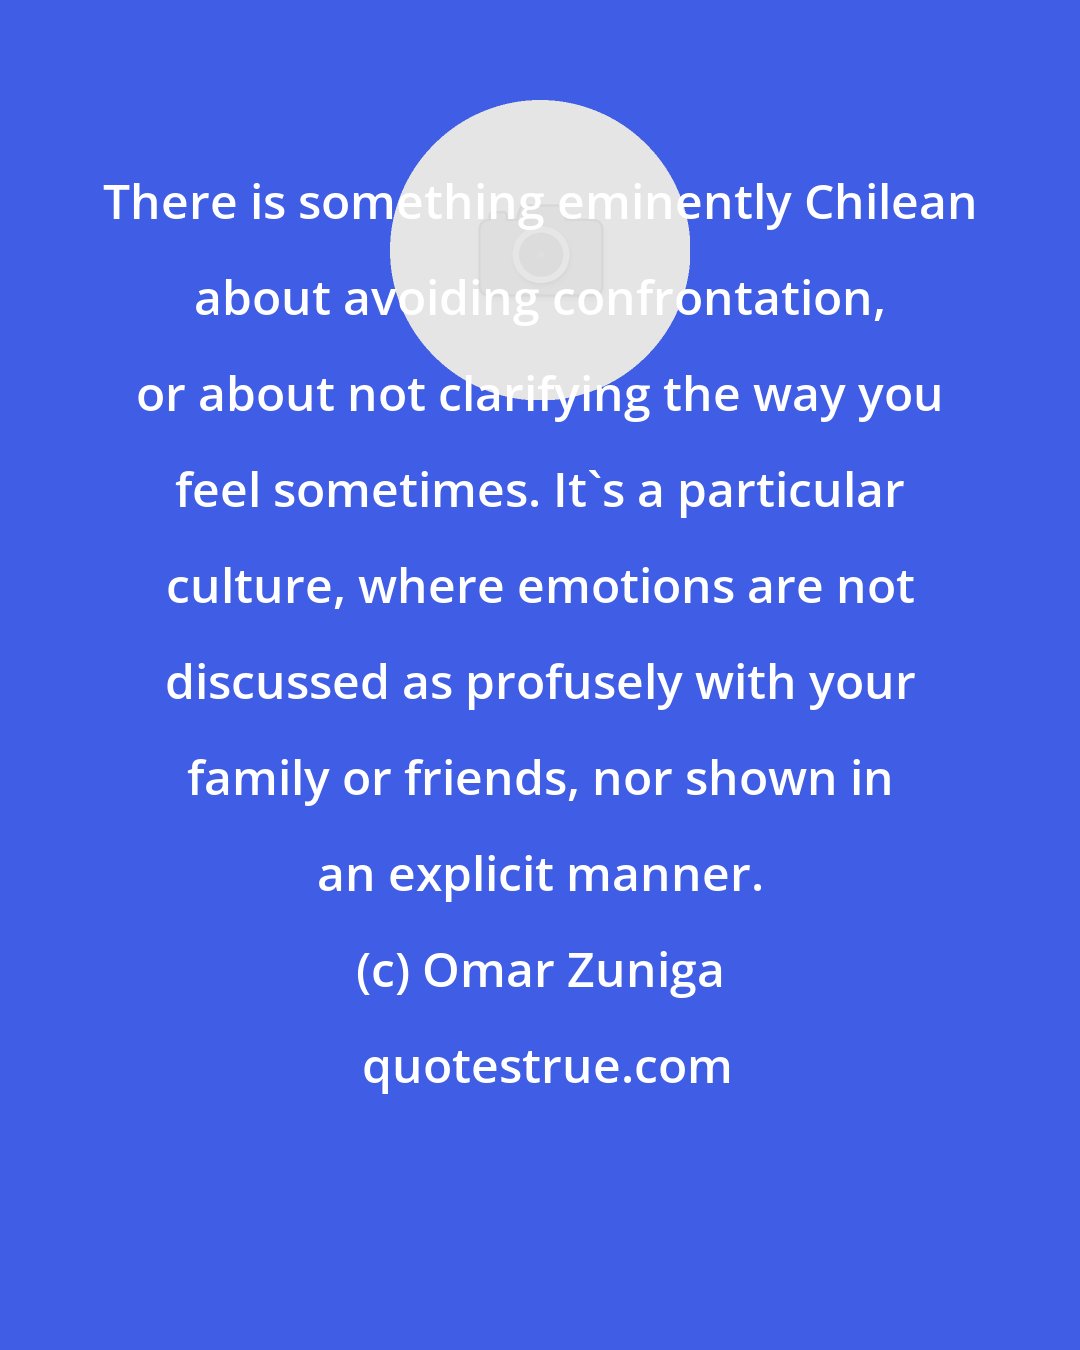 Omar Zuniga: There is something eminently Chilean about avoiding confrontation, or about not clarifying the way you feel sometimes. It's a particular culture, where emotions are not discussed as profusely with your family or friends, nor shown in an explicit manner.